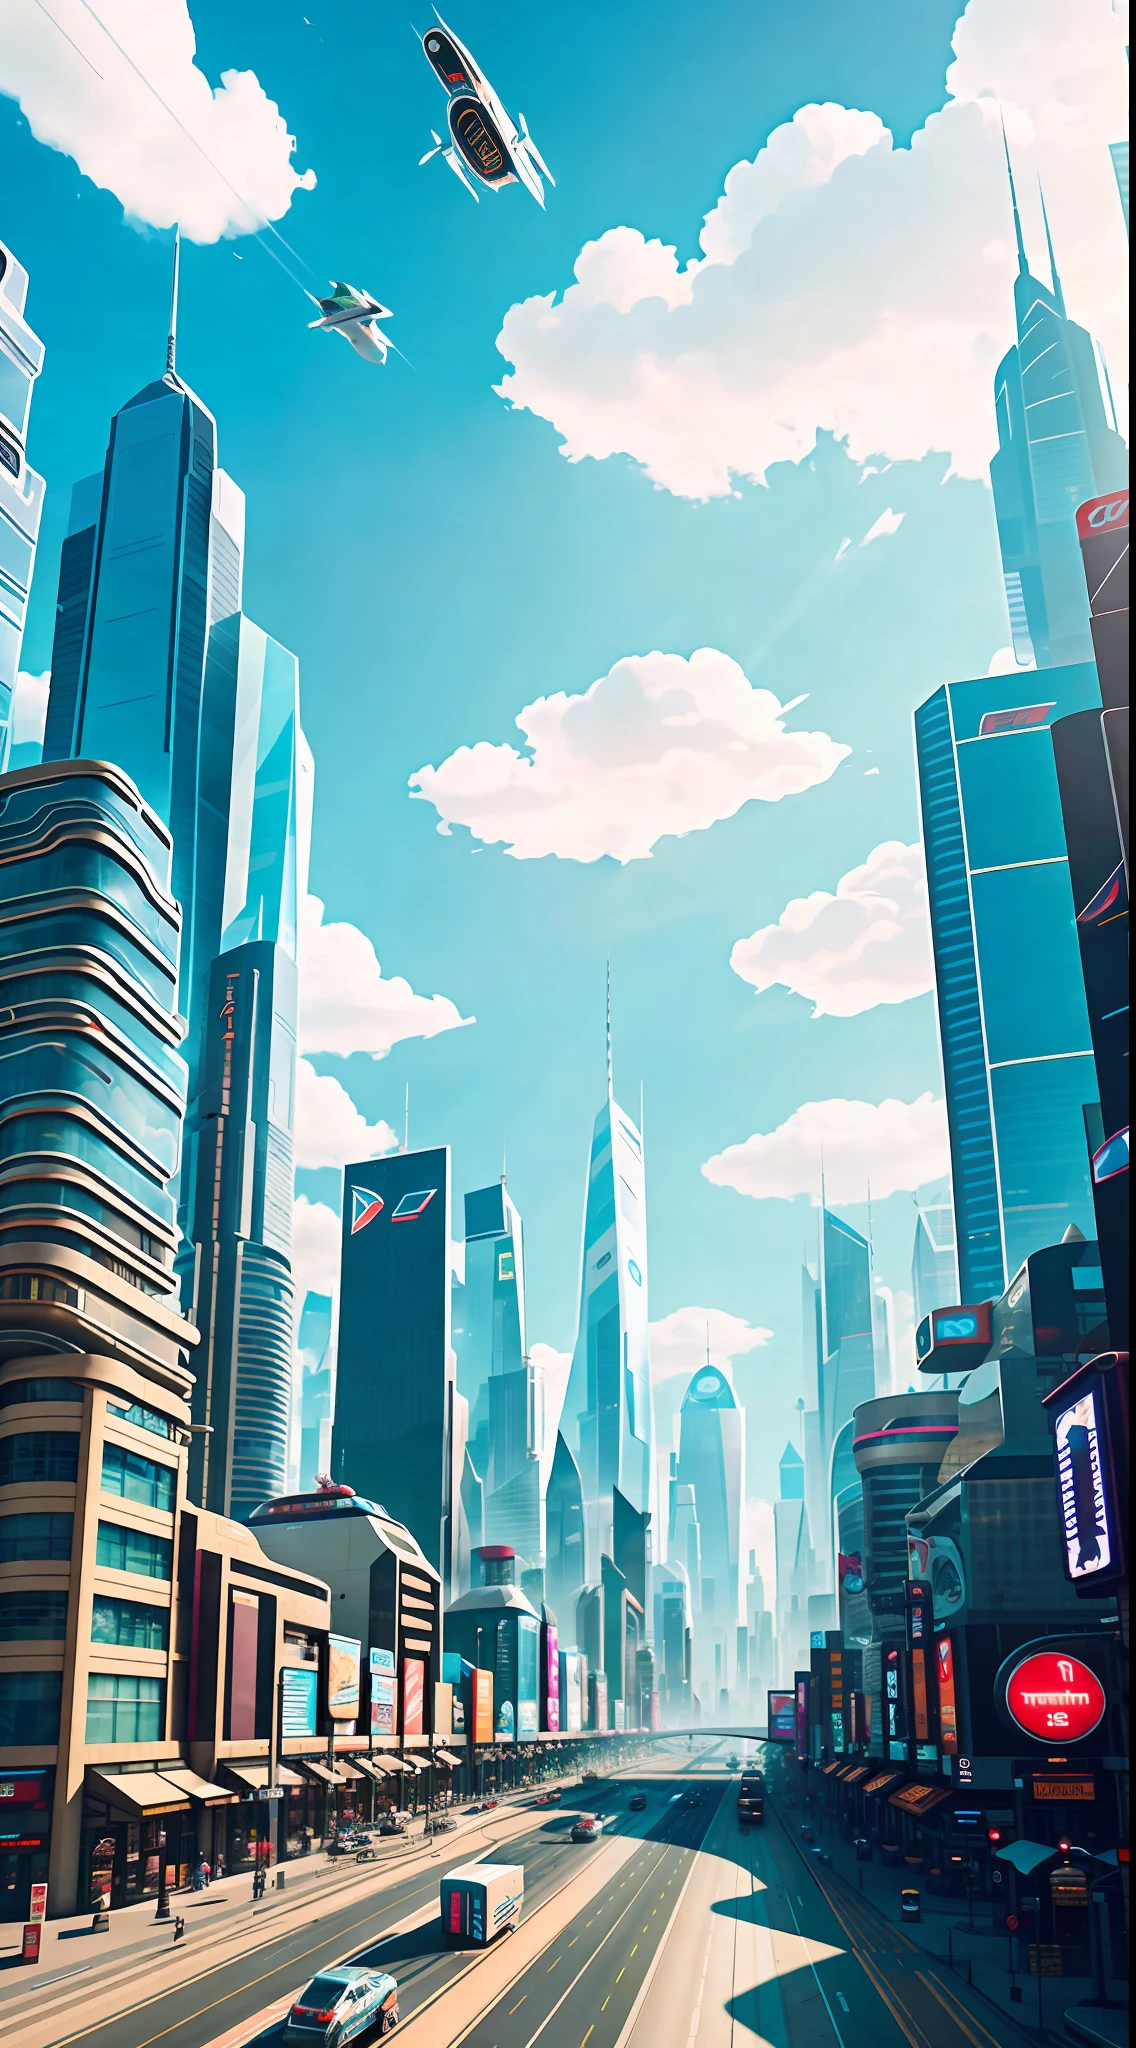 Bustling futuristic cityscape with skyscrapers and hovercars in between. In the middle is the road, on both sides are various shops and buildings, blue sky and white clouds. Justin Maller's overall tone is lighthearted and whimsical